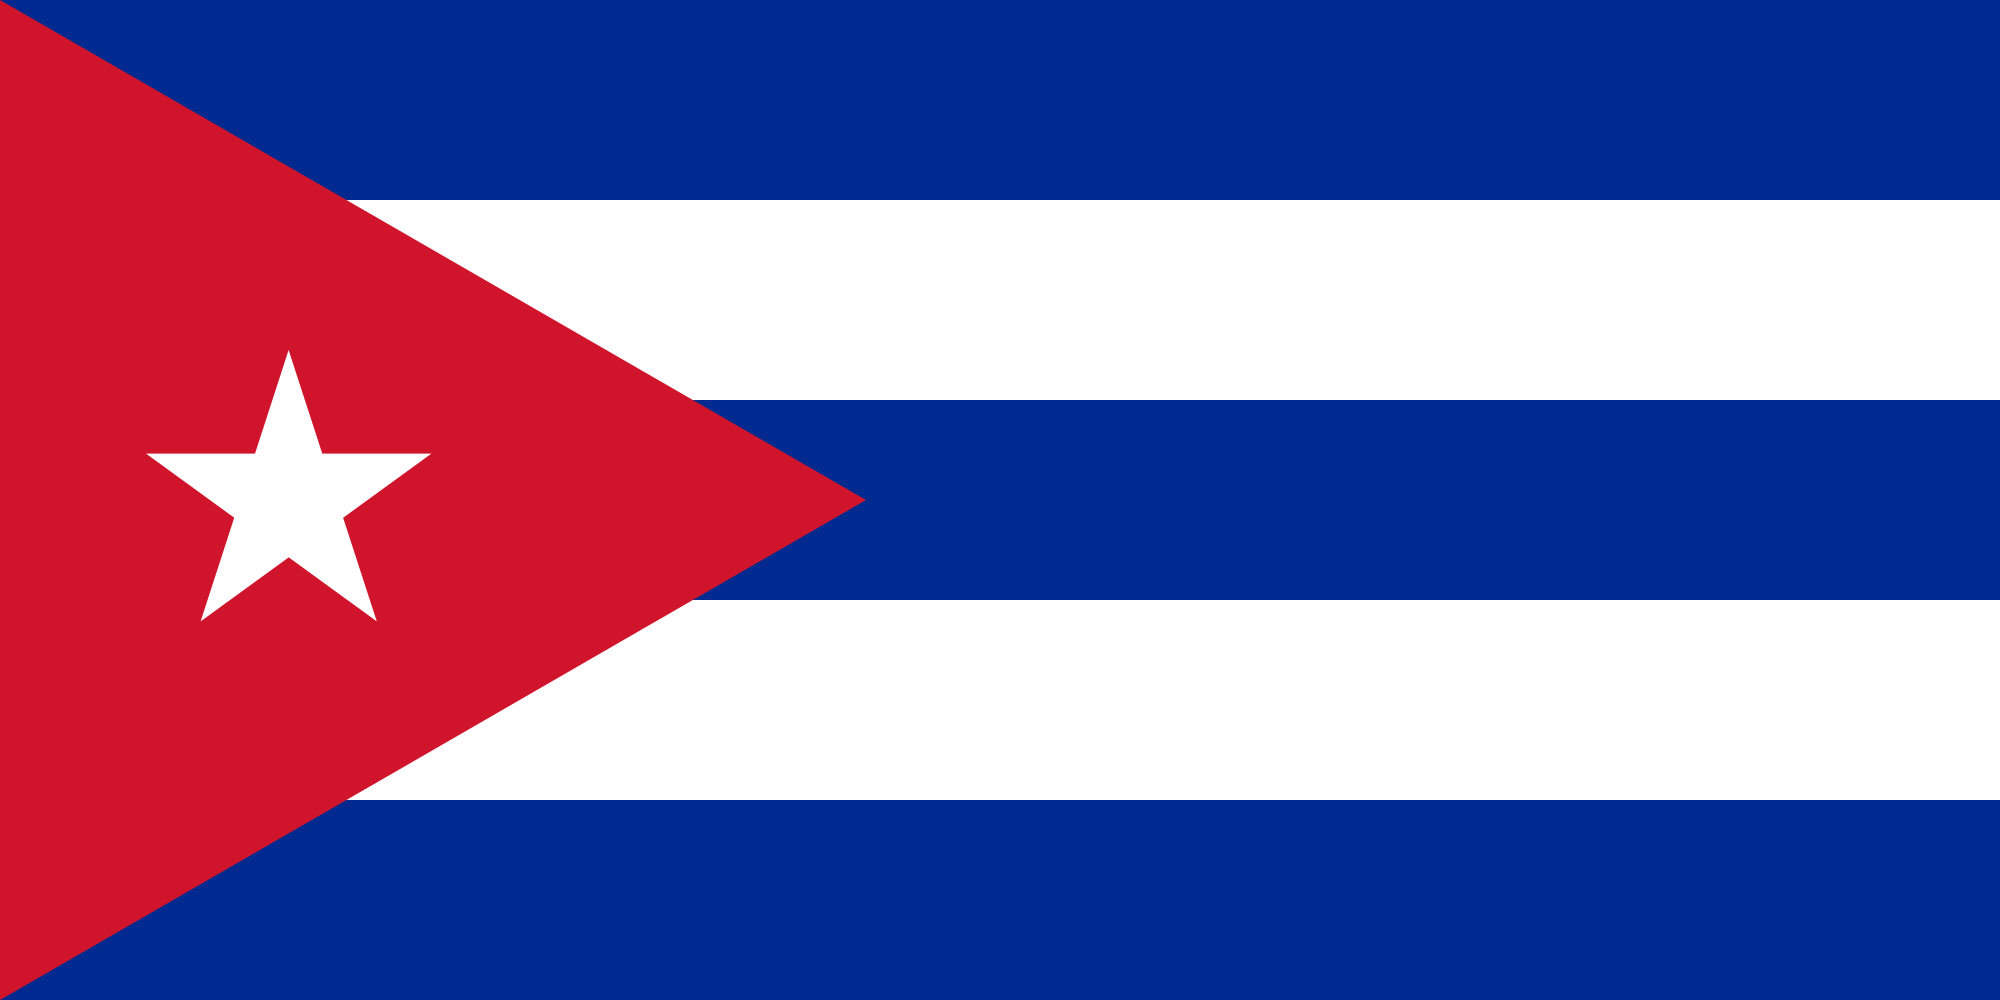 Thumbnail for File:The Flag of the Republic of Cuba.png